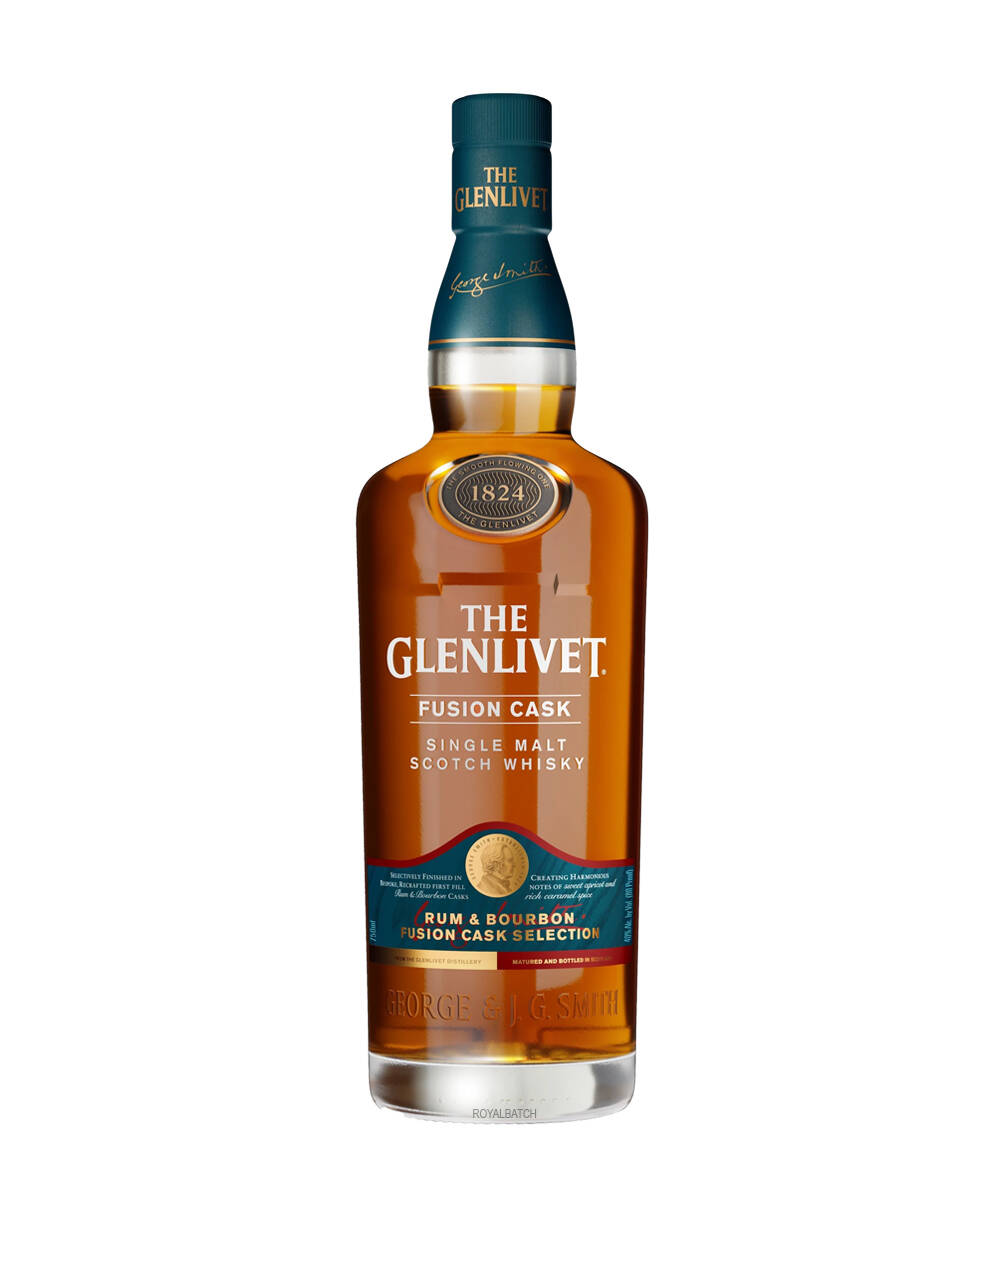 The Glenlivet Fusion Cask Rum and Bourbon Selection Scotch Whisky